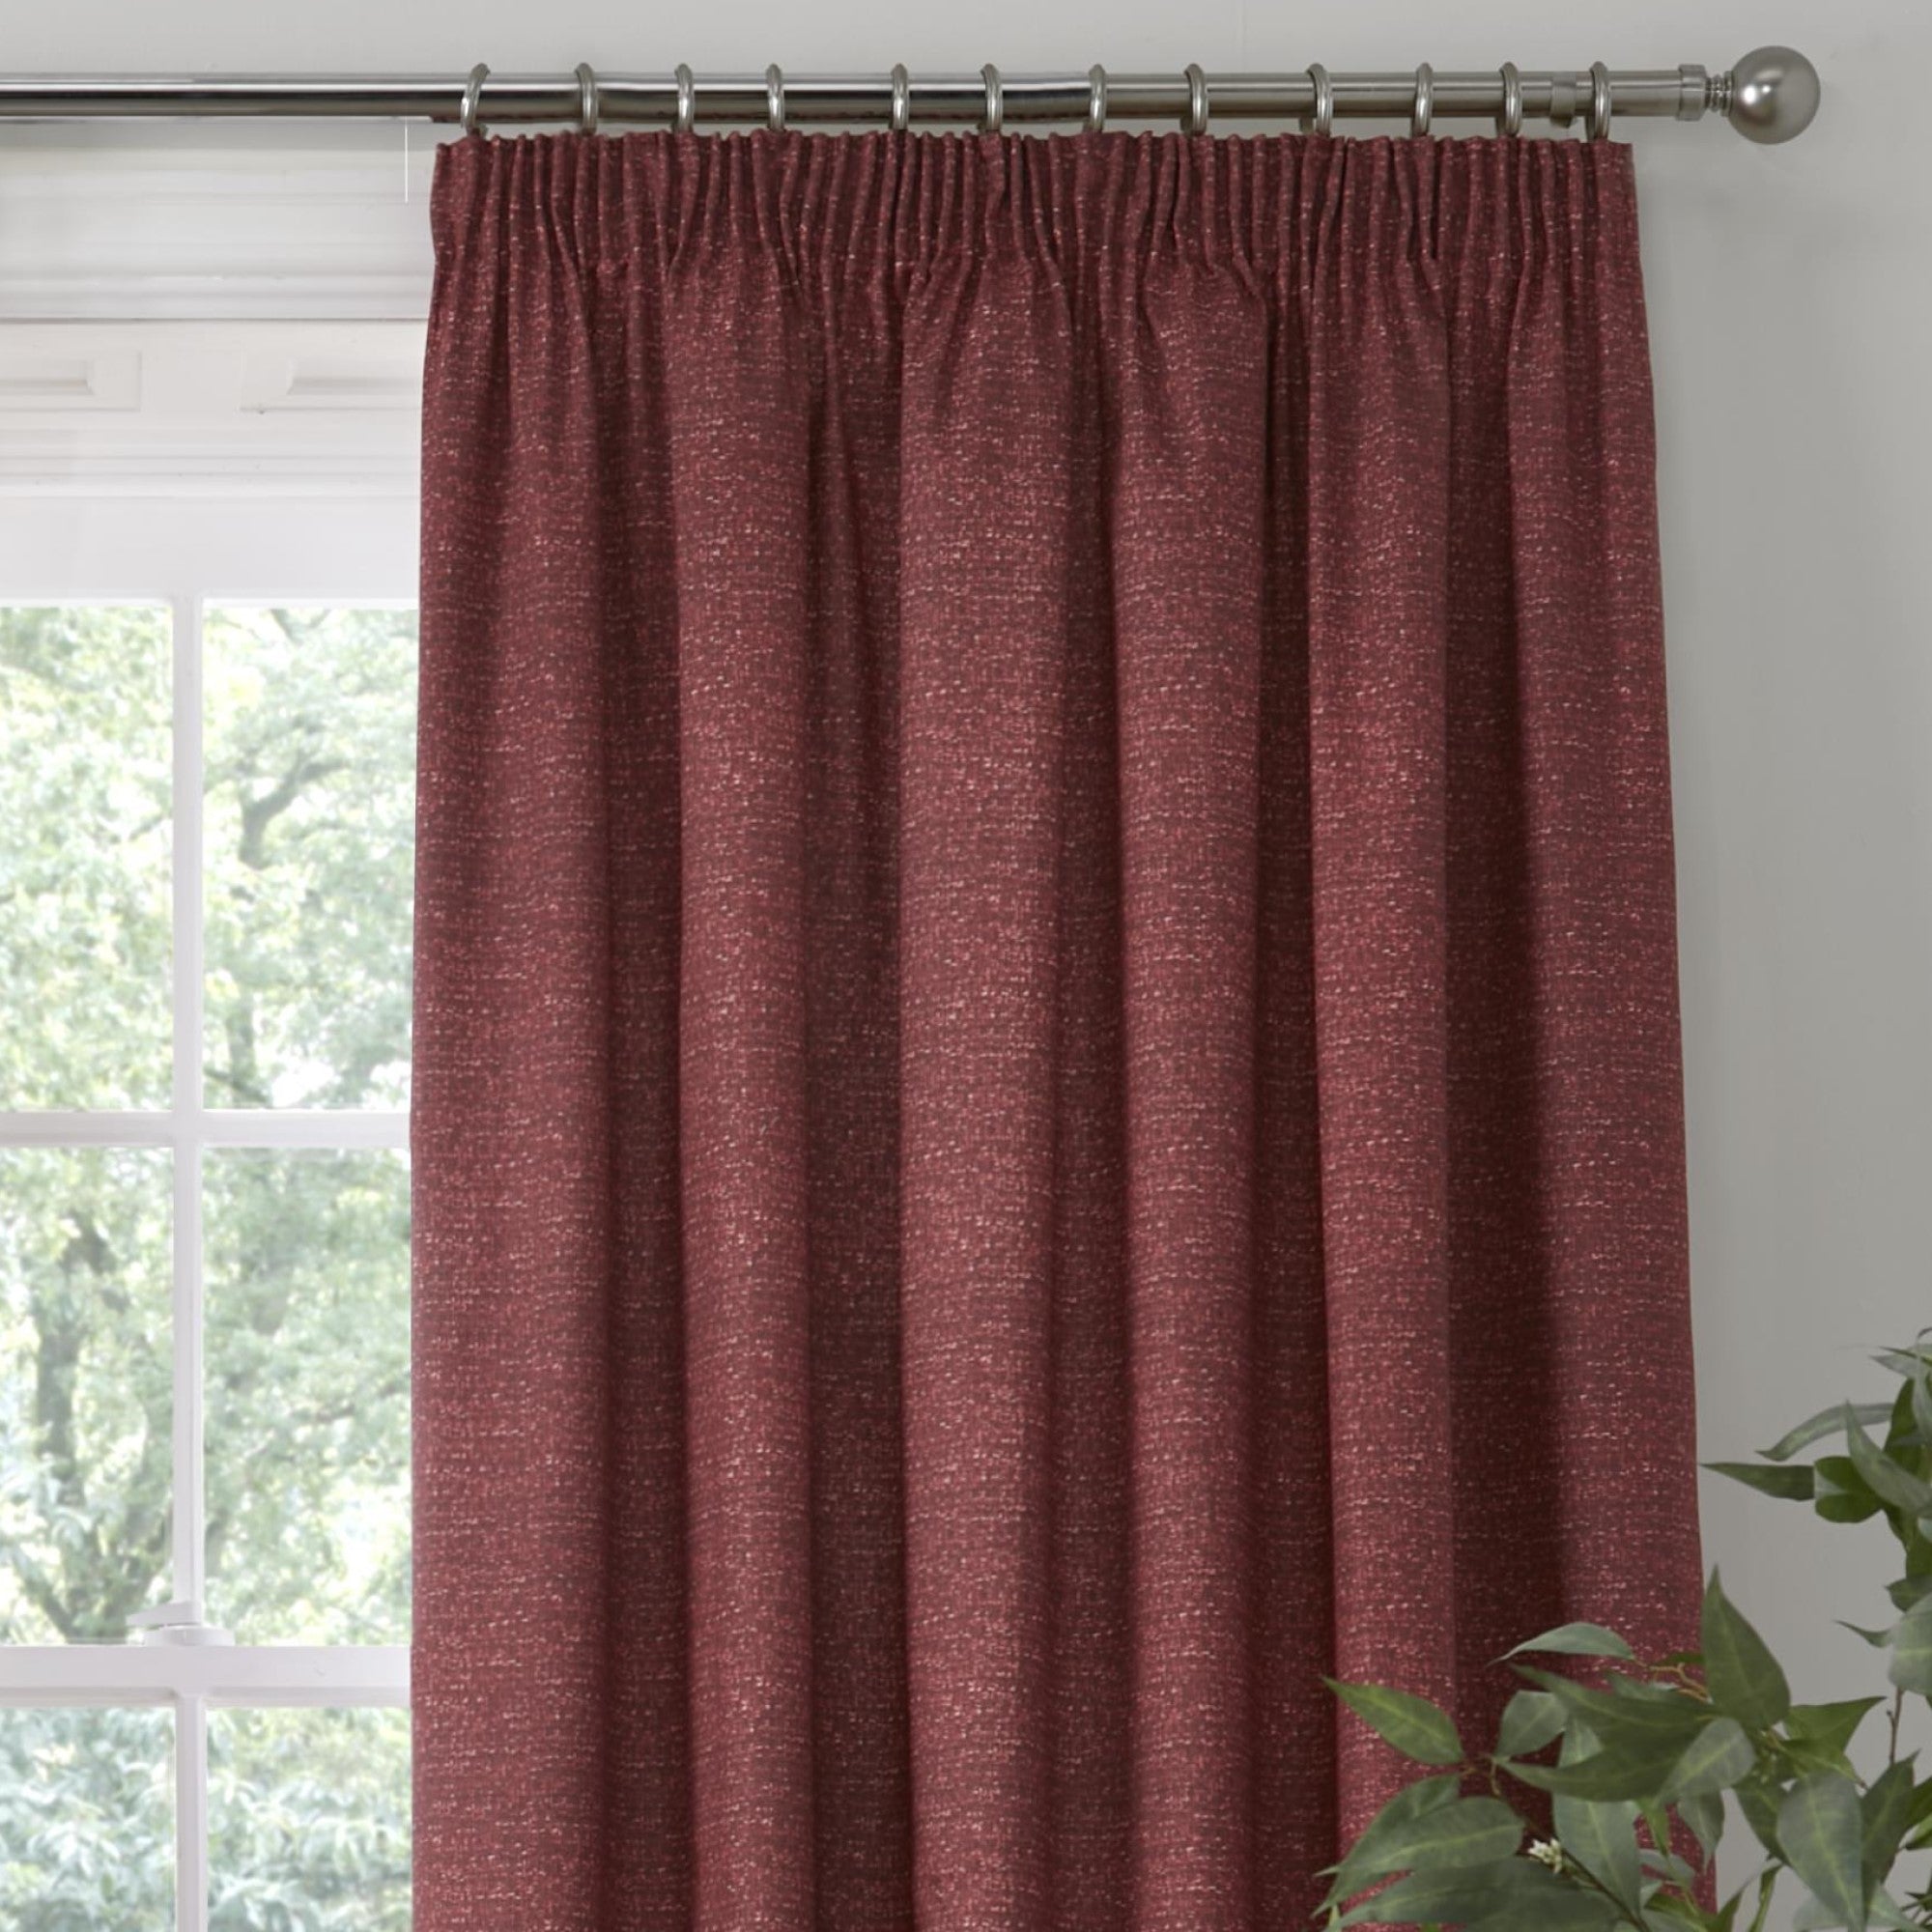 Pair of Pencil Pleat Curtains With Tie-Backs Pembrey by D&D in Red